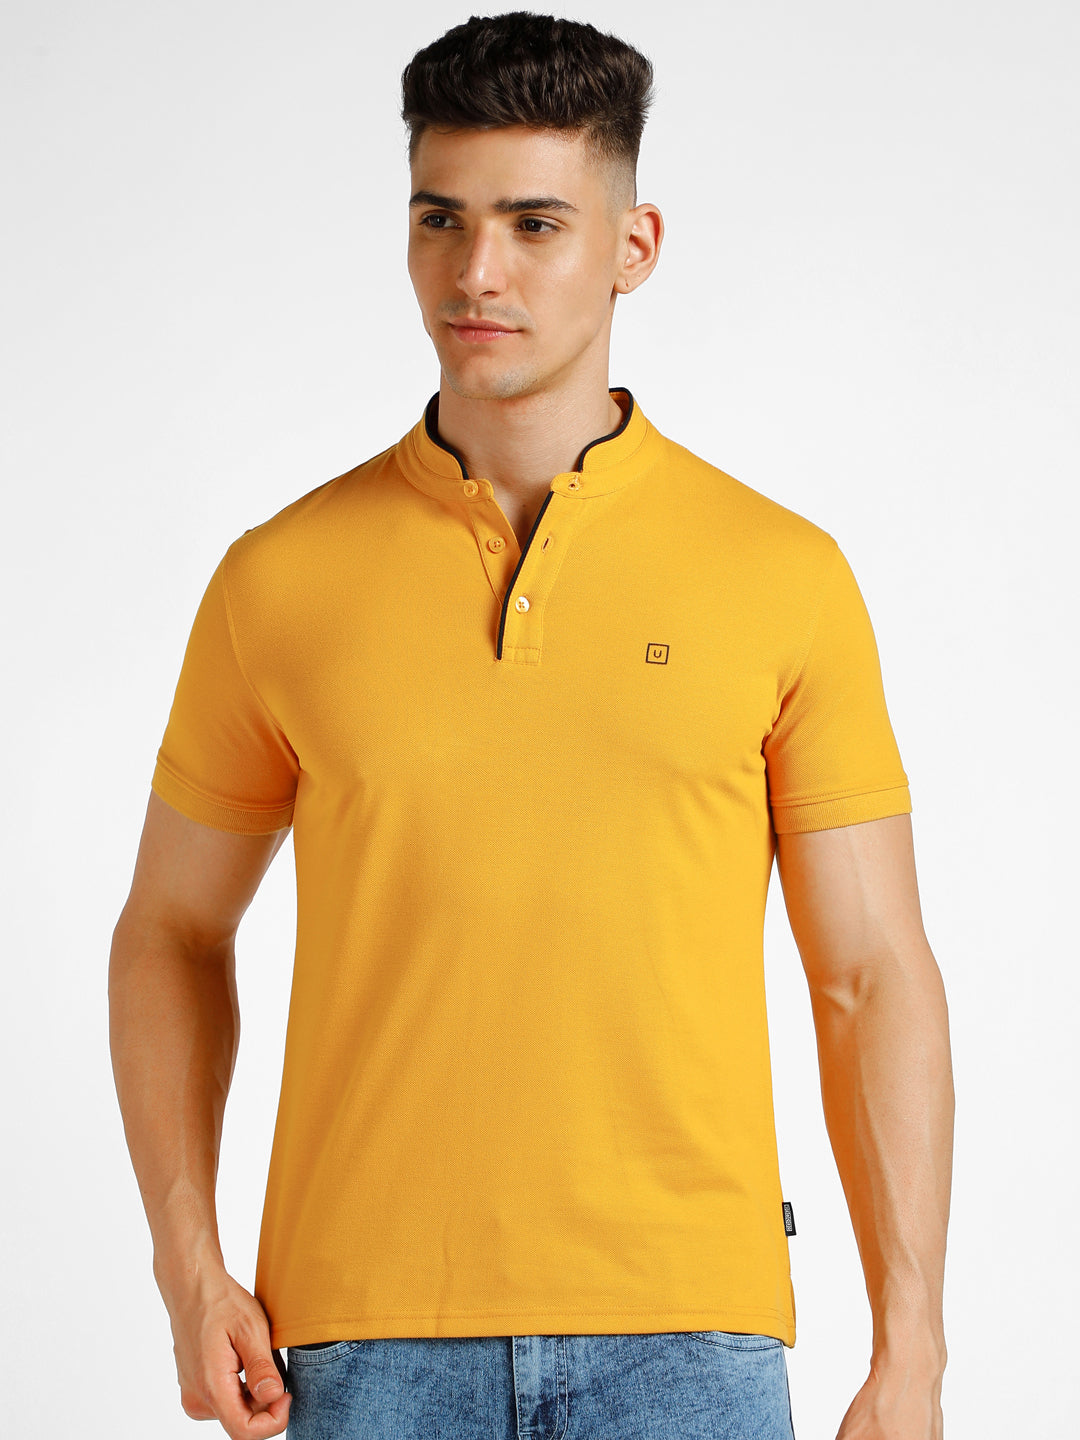 Men's Yellow Solid Slim Fit Half Sleeve Cotton Polo T-Shirt with Mandarin Collar